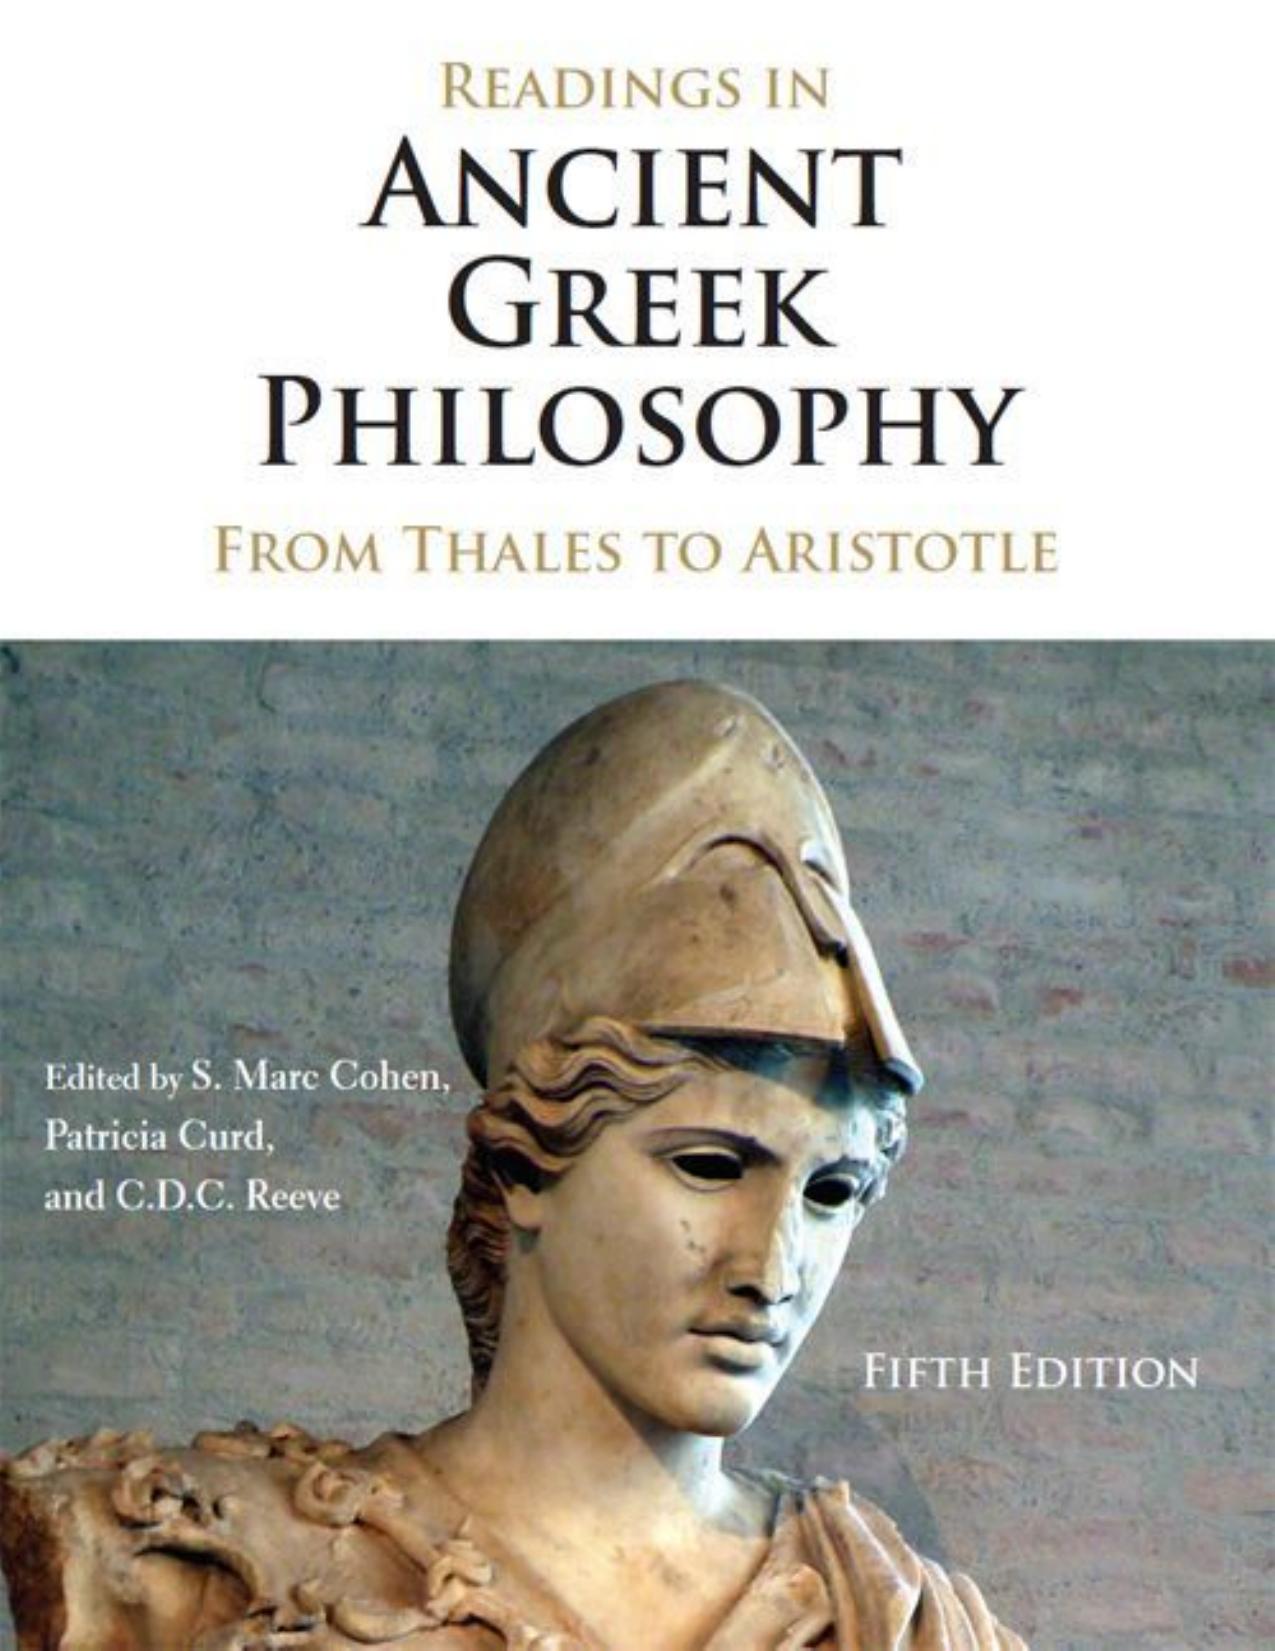 (eBook PDF)Readings in Ancient Greek Philosophy: From Thales to Aristotle 5th Edition by S. Marc Cohen,Patricia Curd